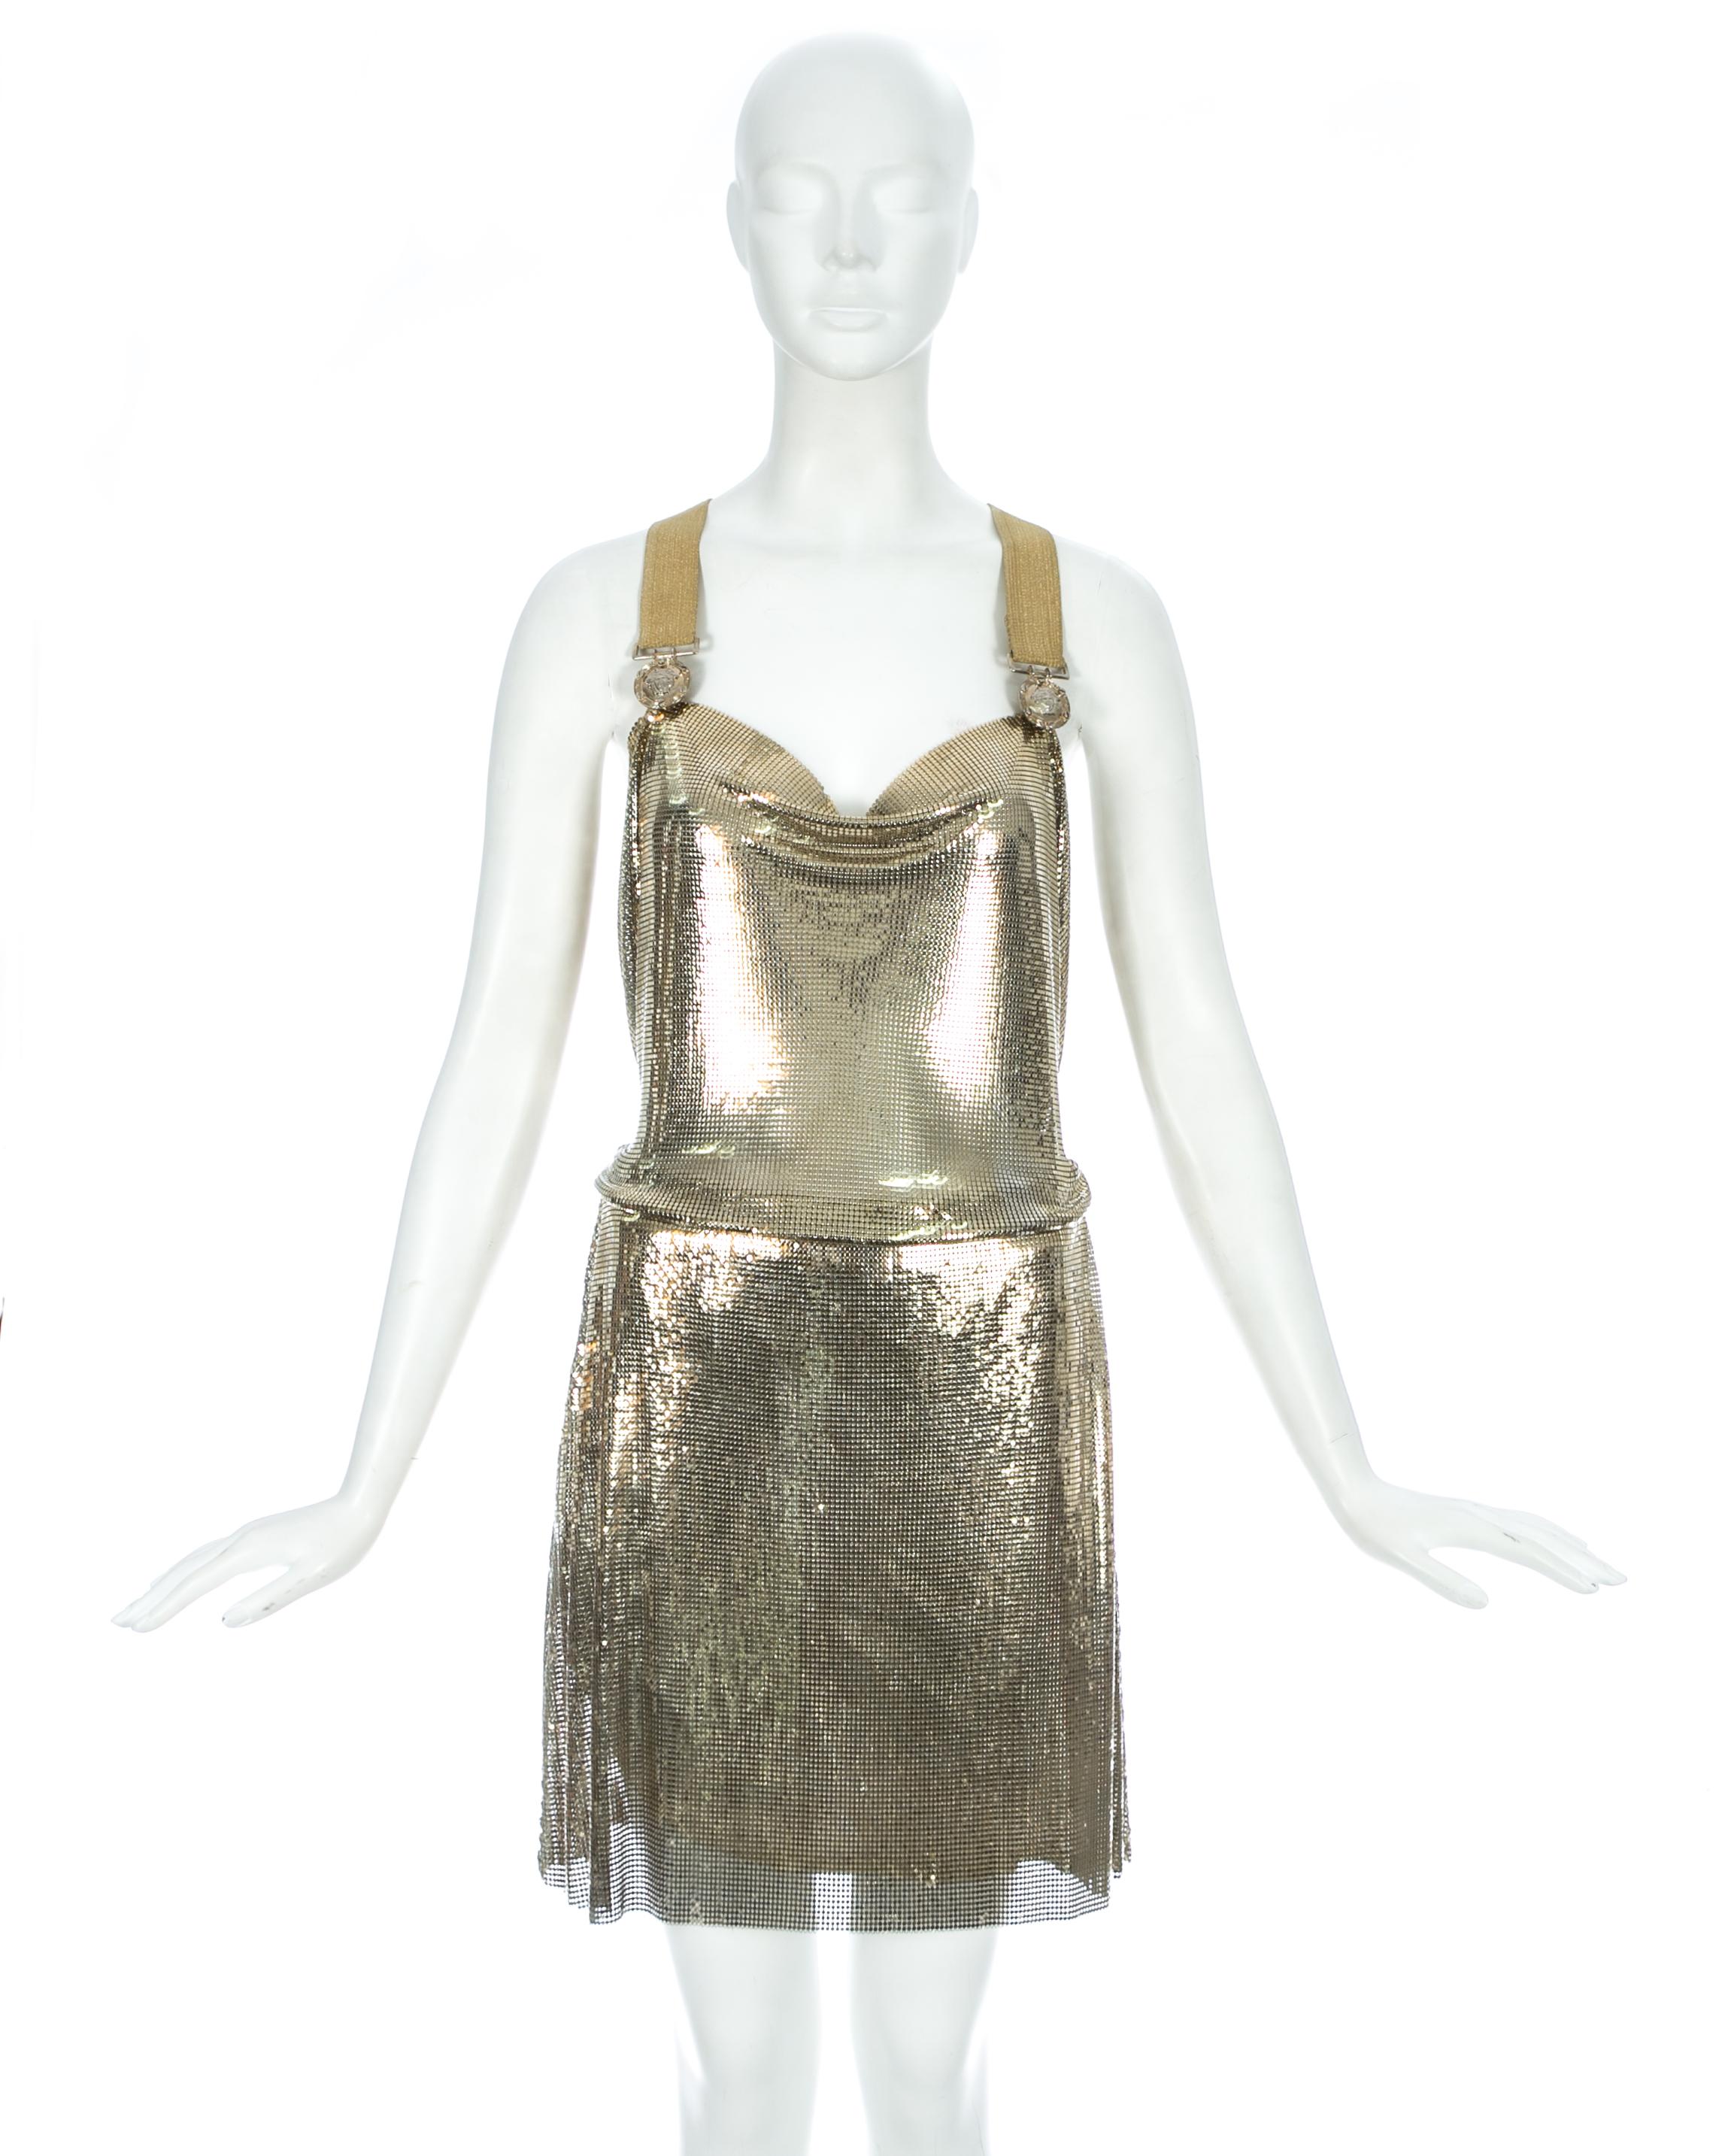 Gianni Versace; gold metal mesh evening dress comprises mini skirt with silk lining and a matching bodysuit with 2 gold plate medusa circular clasps, designed to be worn tucked into the skirt and drape over the waist band.

Fall-Winter 1994
